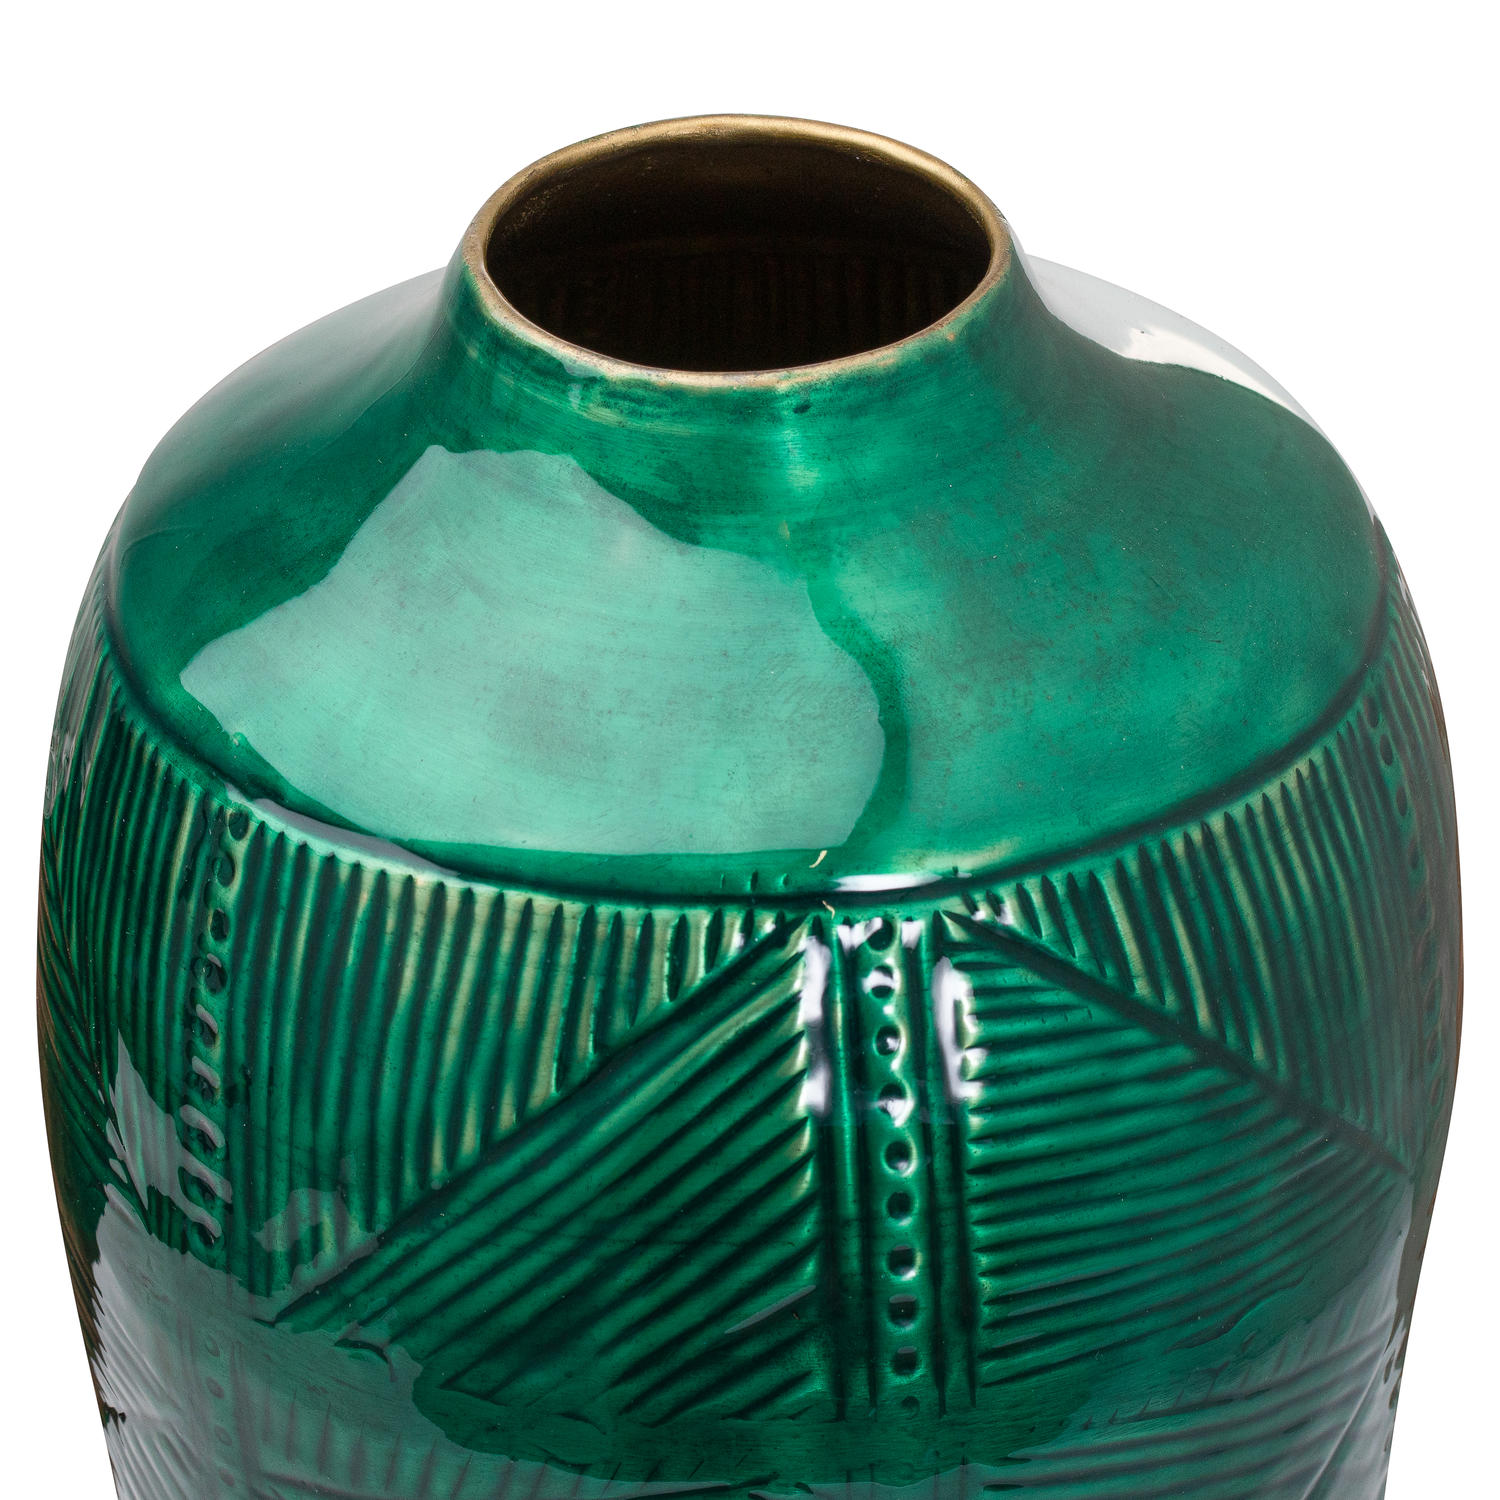 aztec-collection-brass-embossed-ceramic-dipped-urn-vase_21086-a fabric from JLP